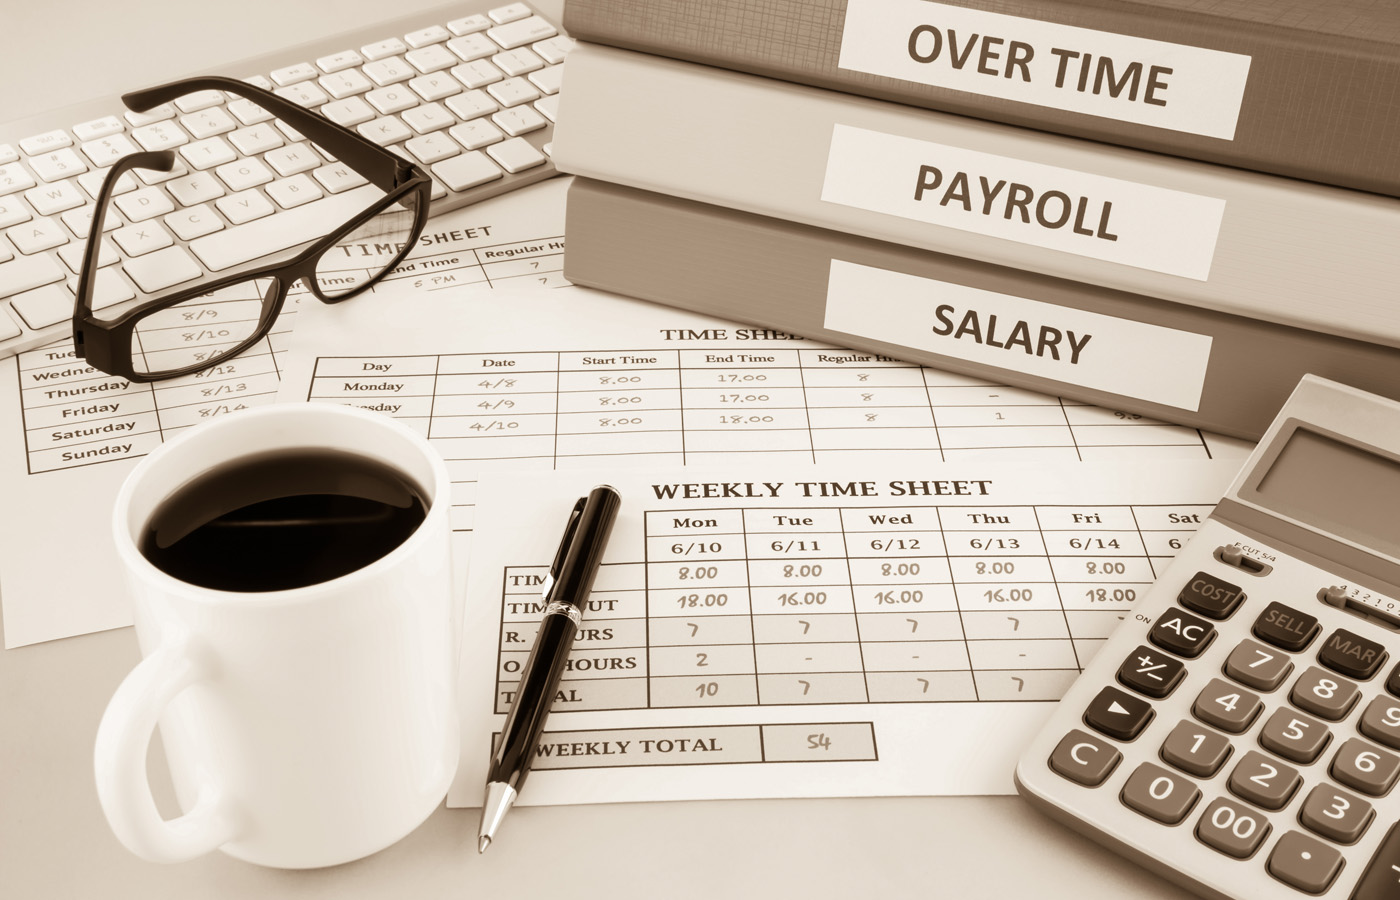 9 Most Common Payroll Mistakes And Ways To Avoid Them